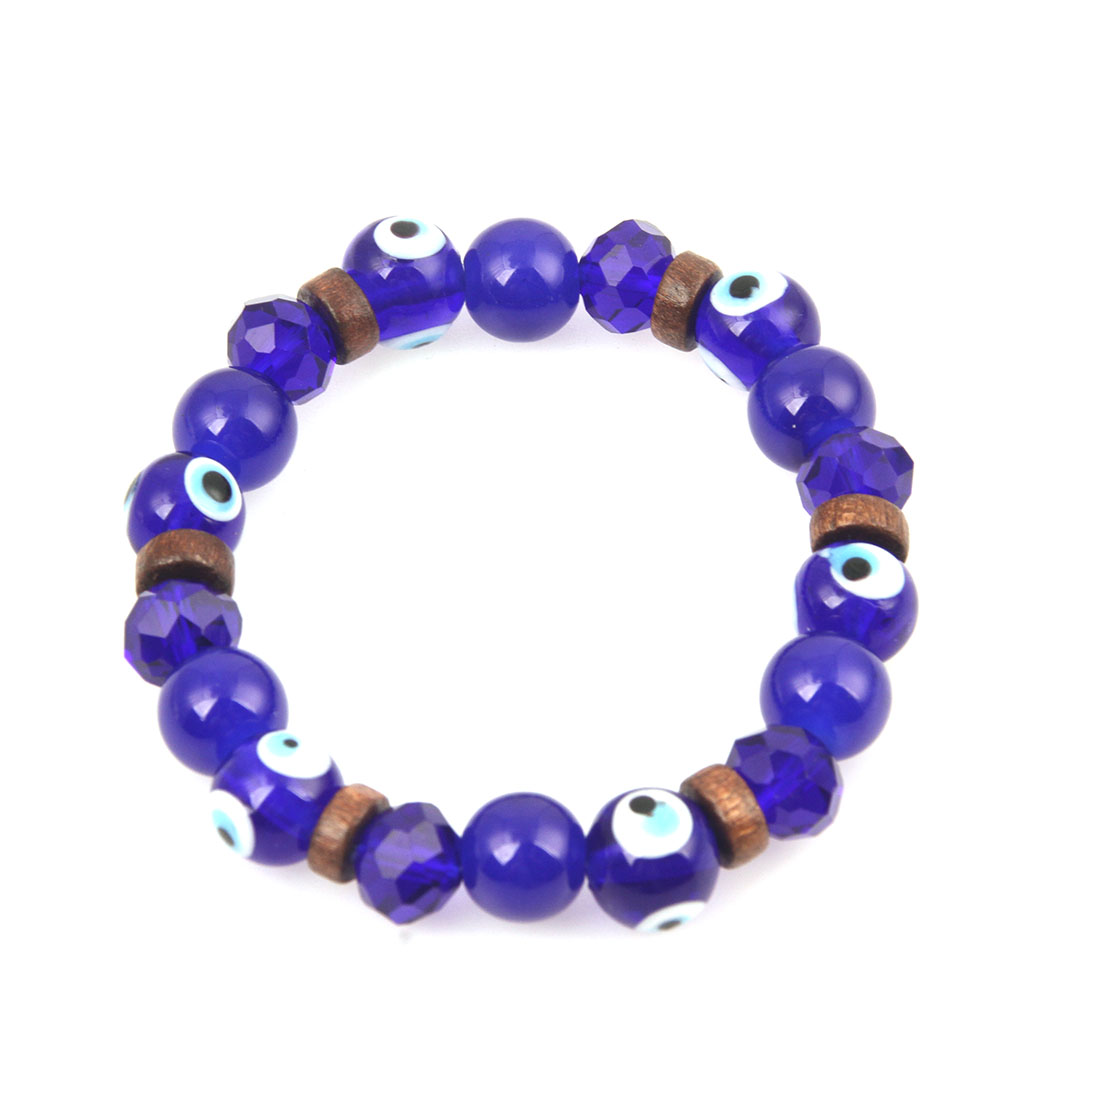 Blue glasses with wooden beads